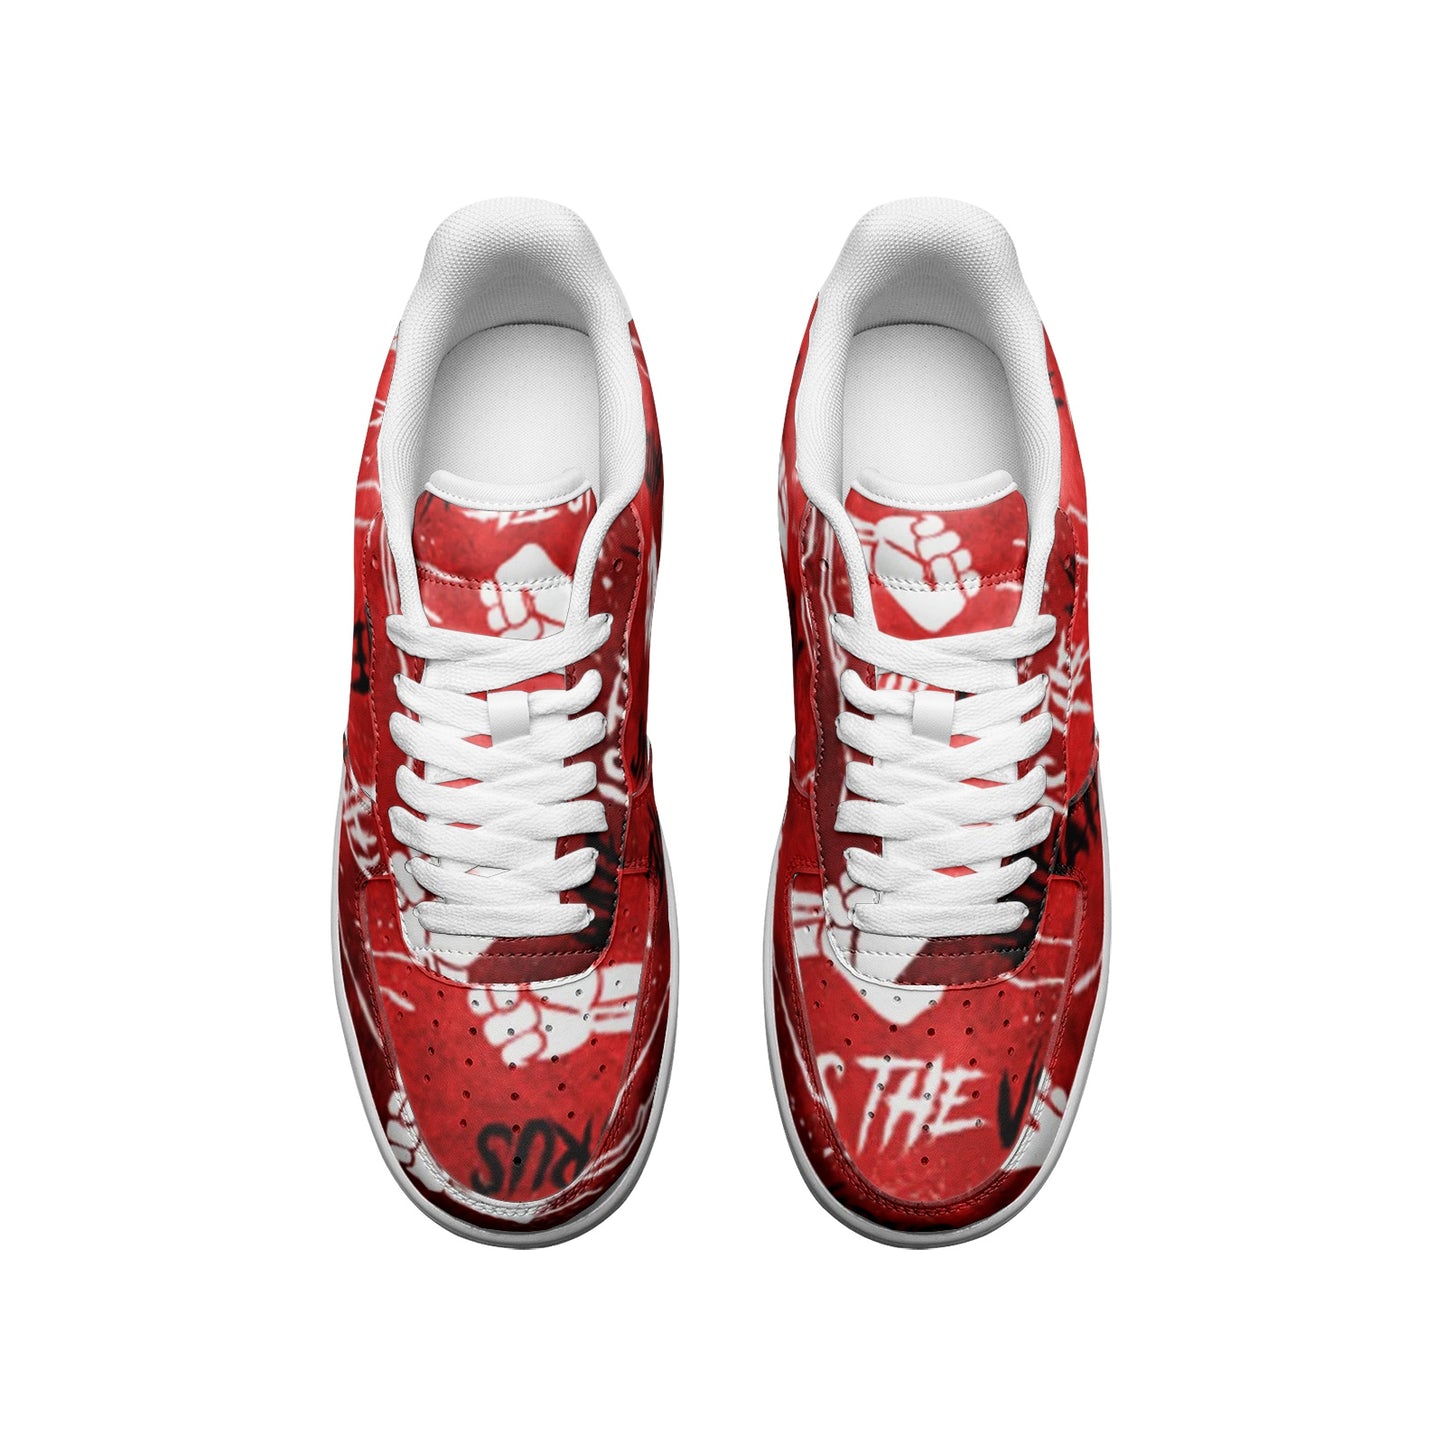 HATE IS THE VIRUS Low Top Leather Sneakers